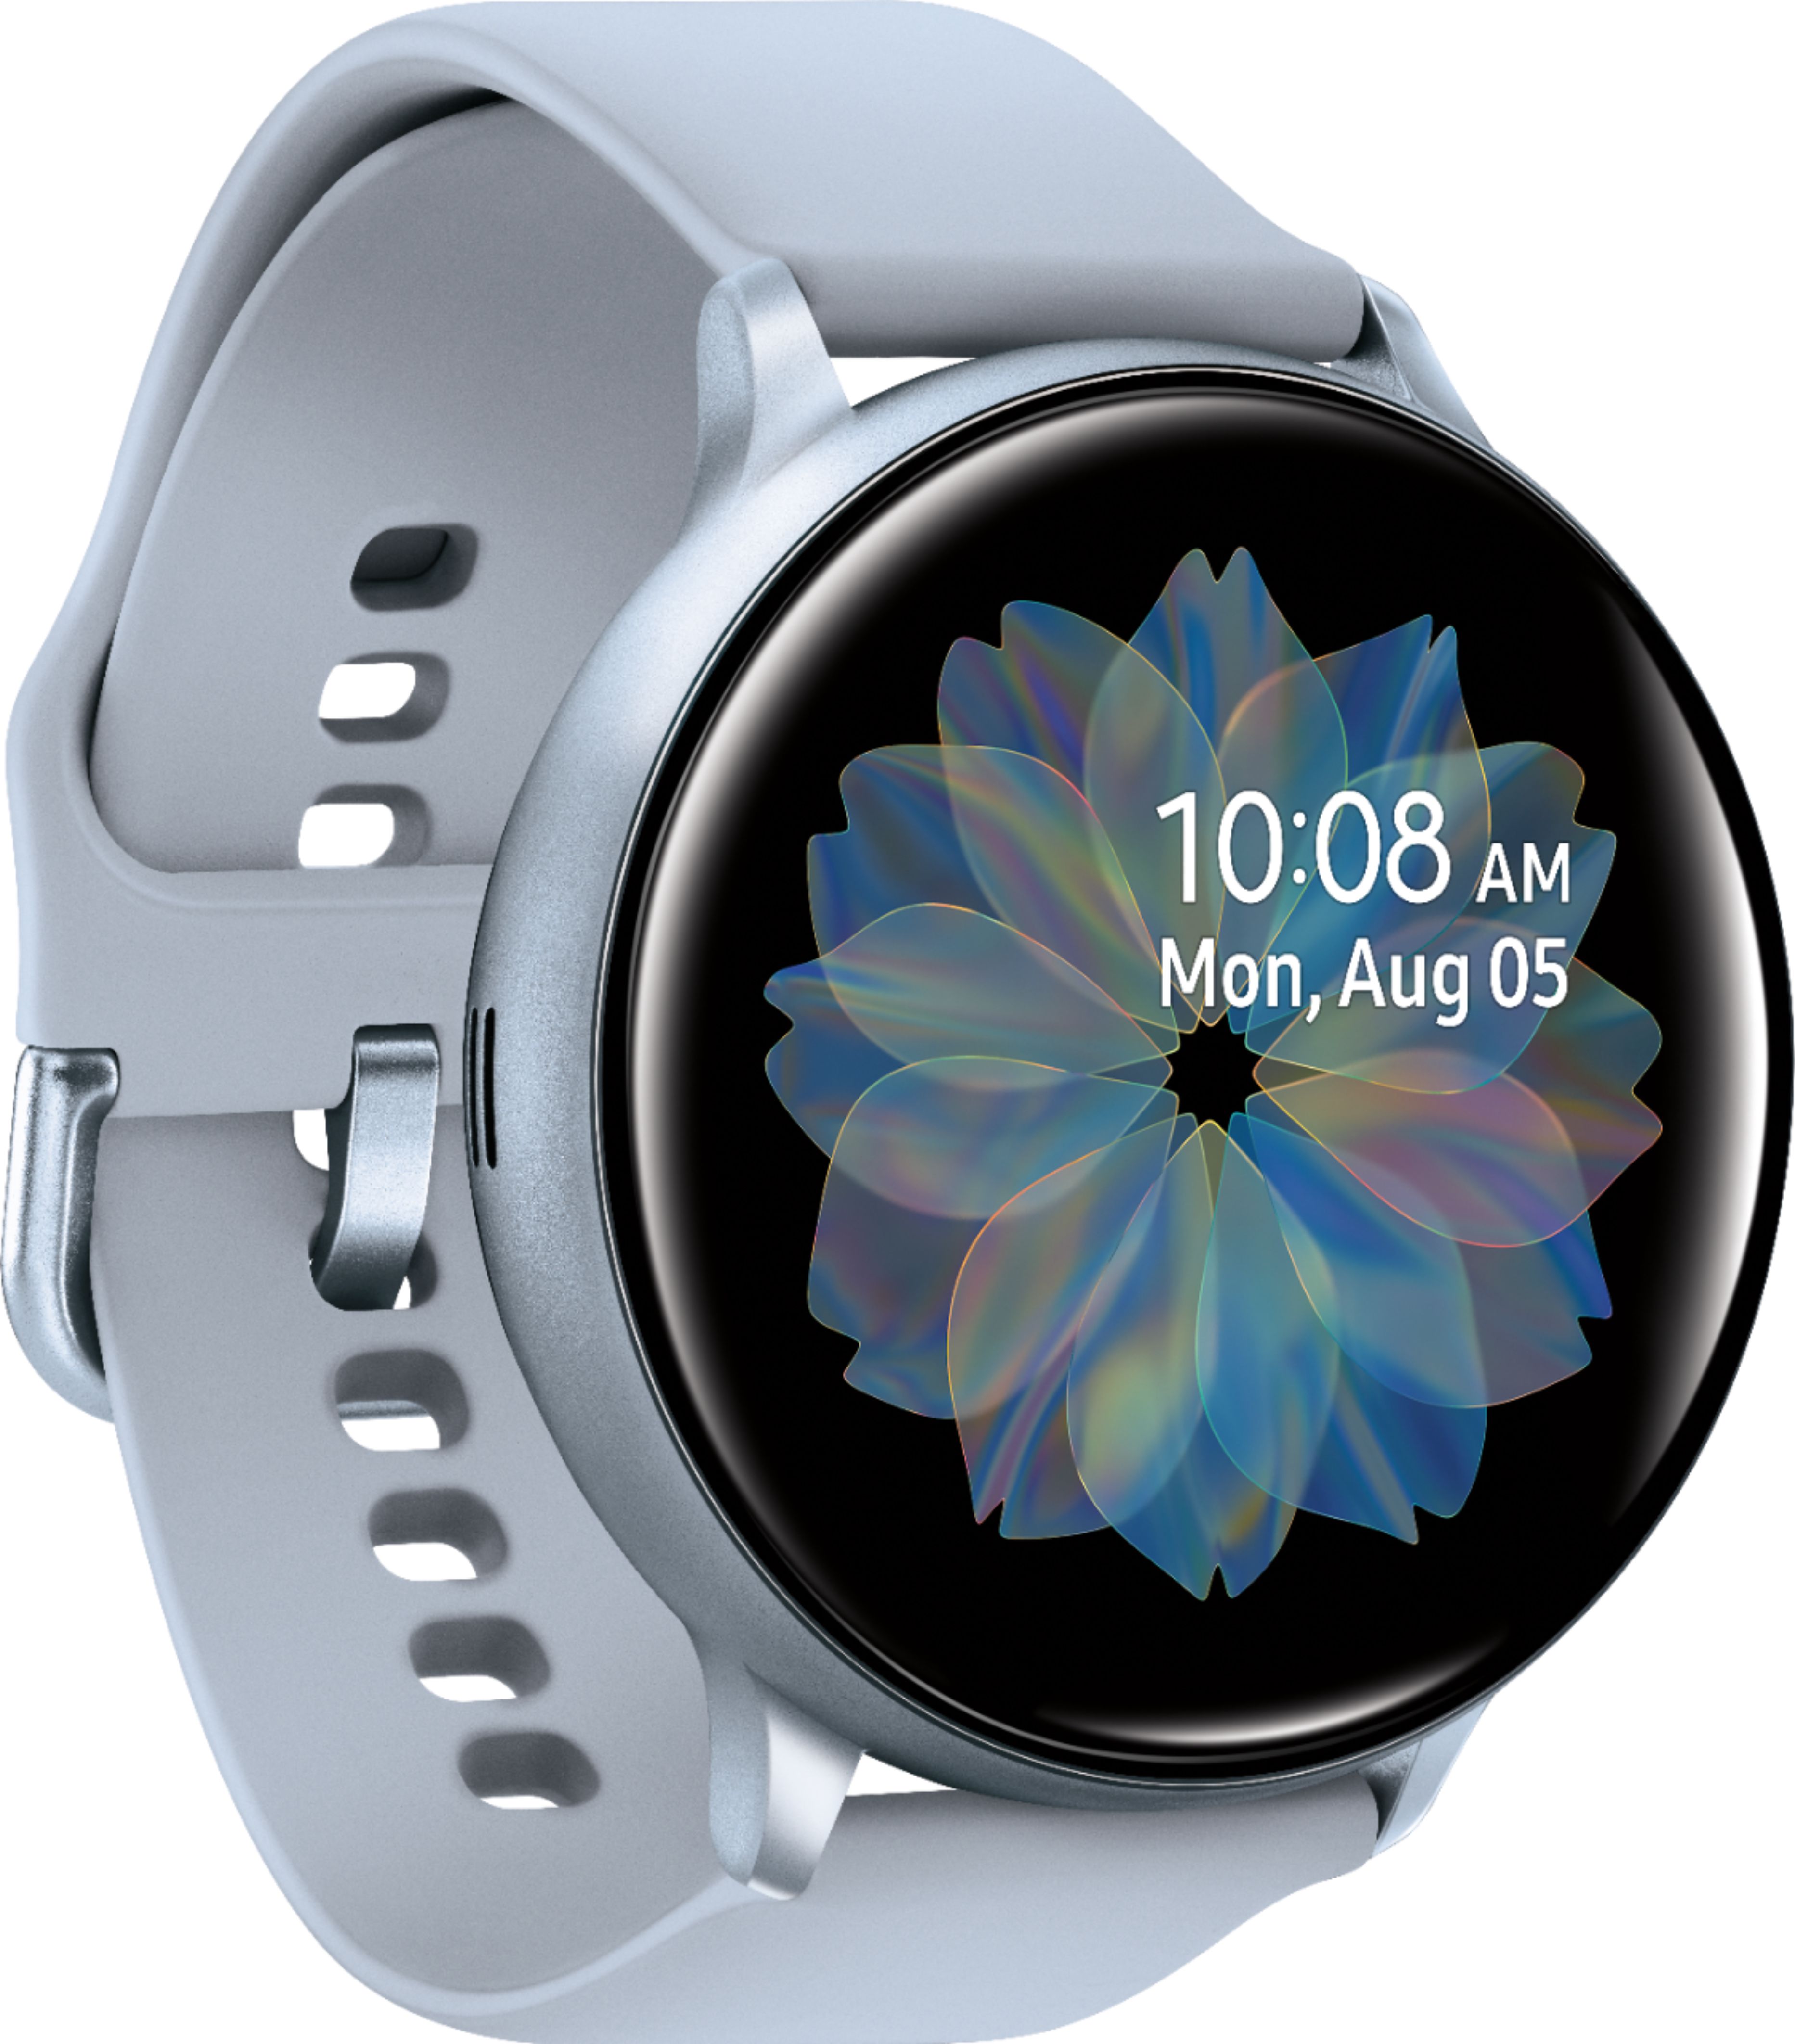 Angle View: Samsung - Geek Squad Certified Refurbished Galaxy Watch Active2 Smartwatch 44mm Aluminum - Cloud Silver